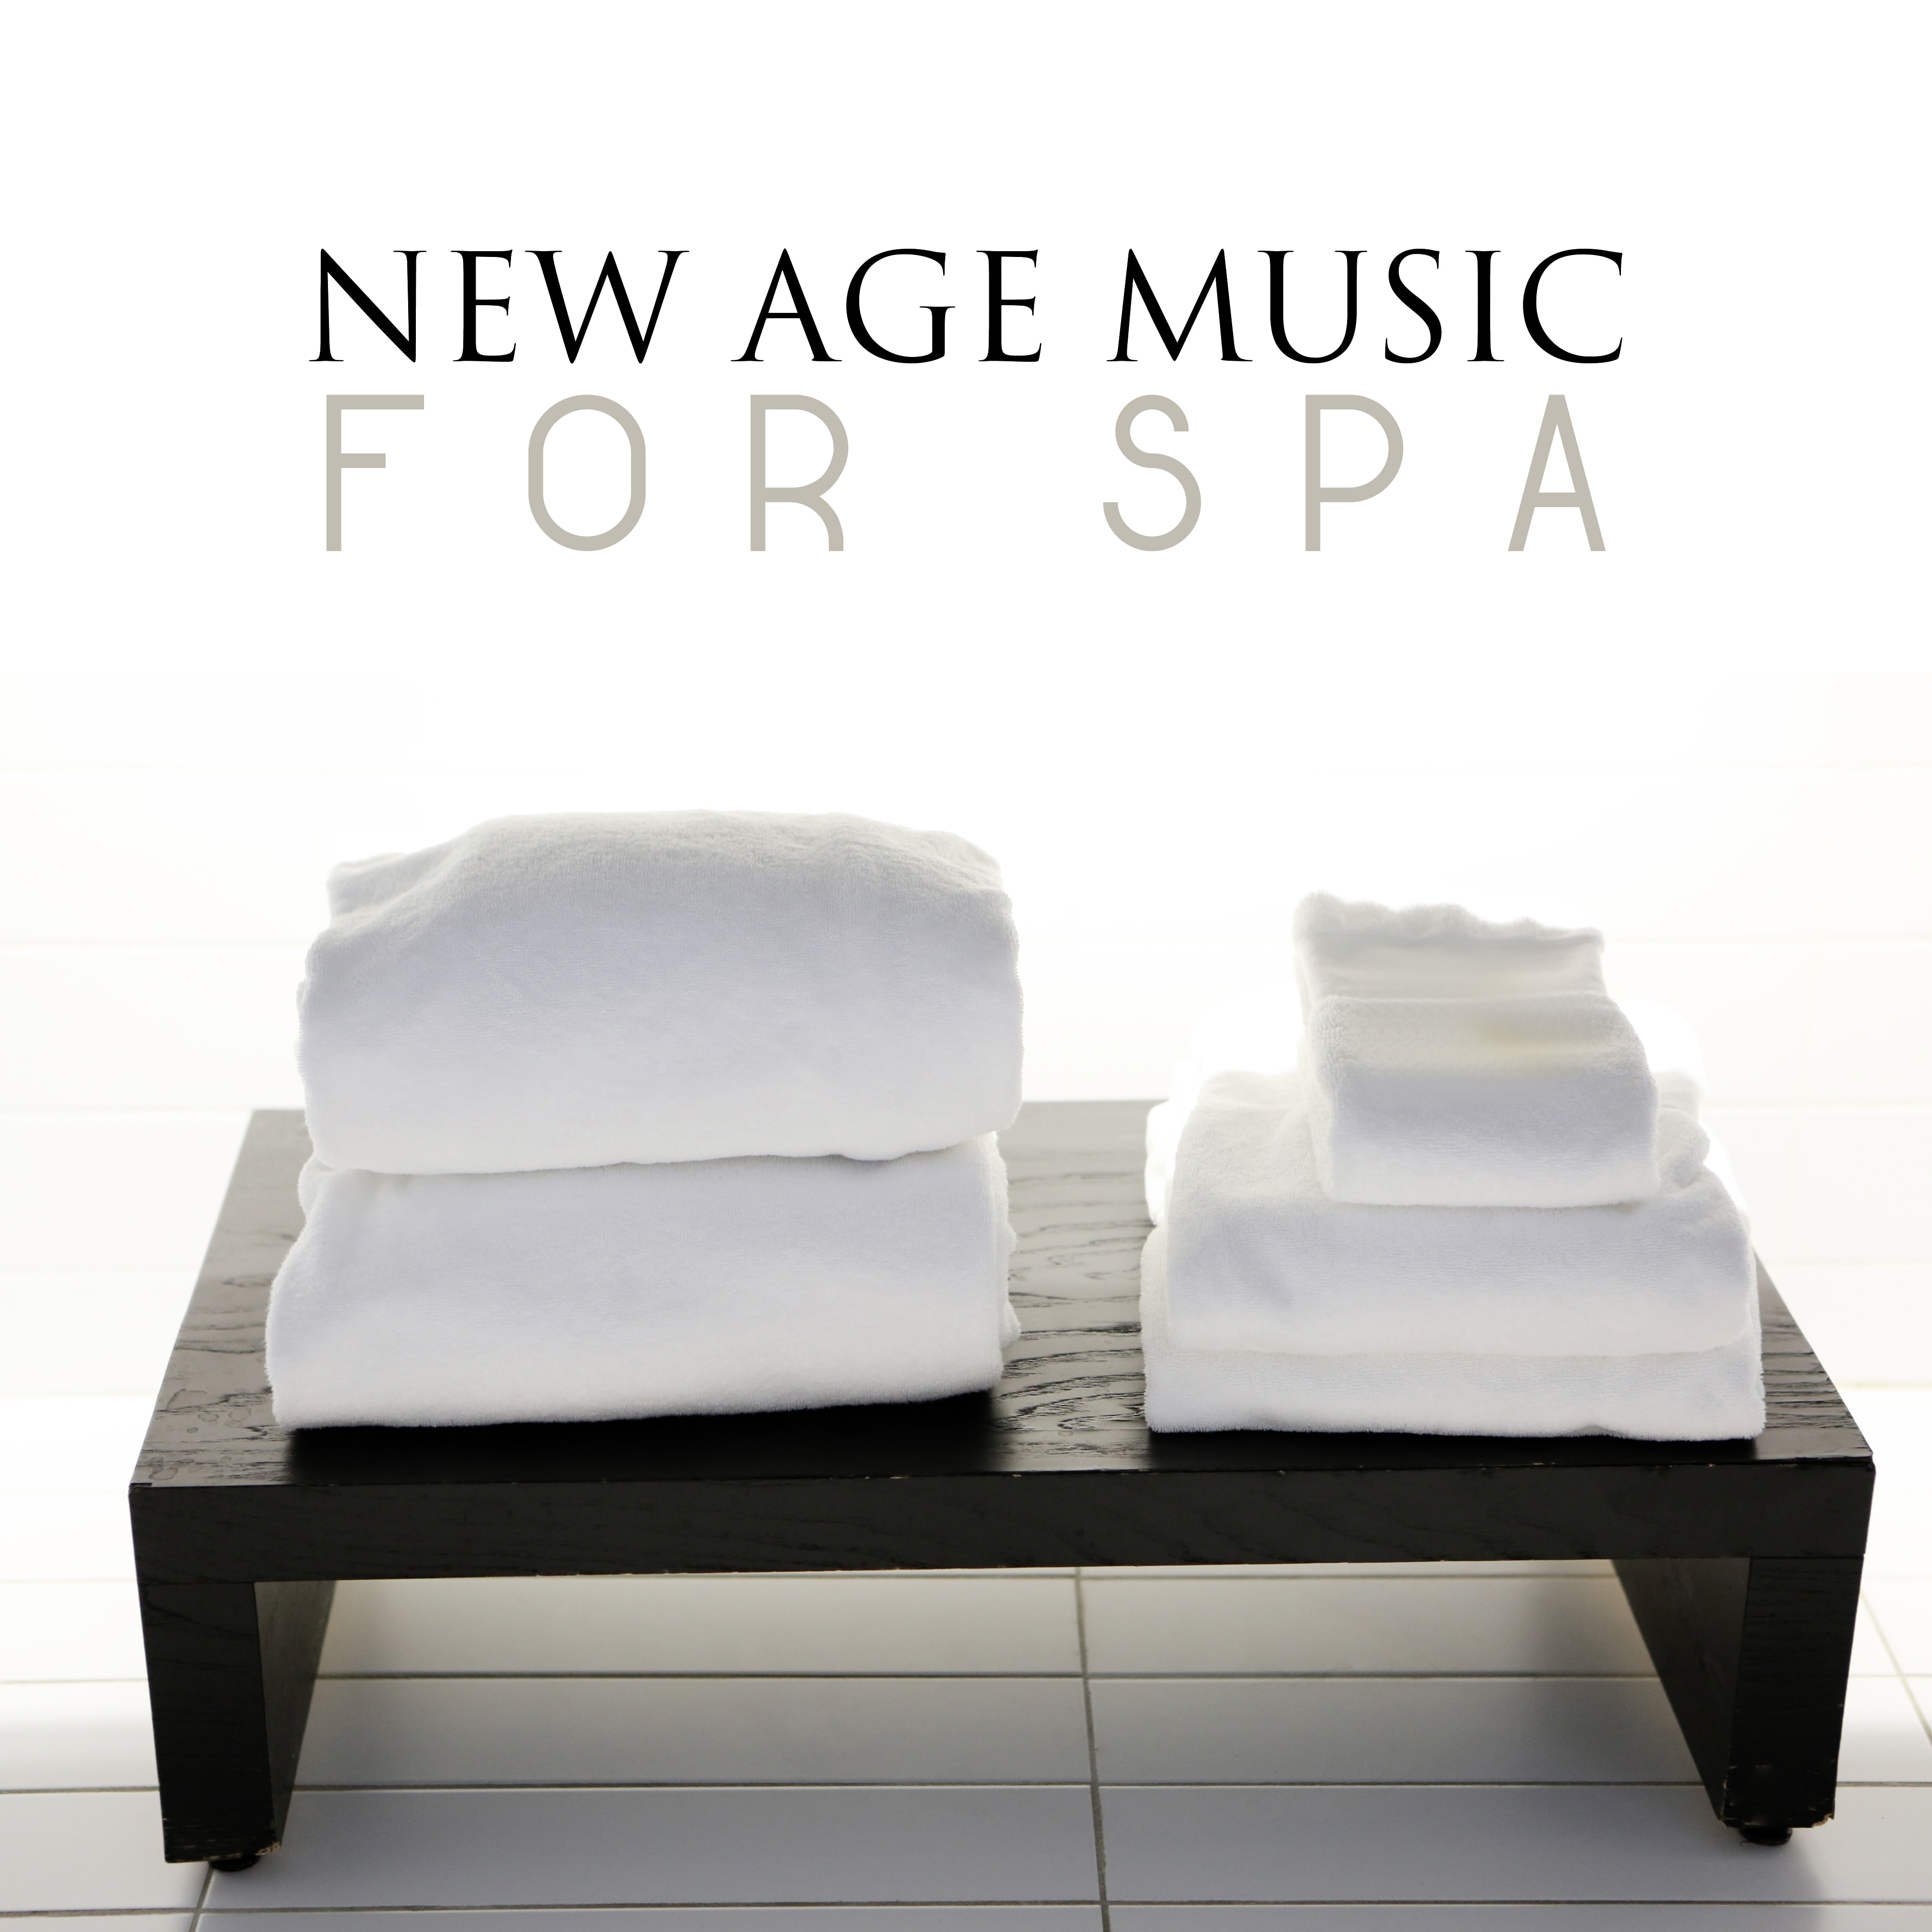 New Age Music for Spa – Massage Dream, Deep Relief, Anti Stress Sounds, Healing Nature, Zen, Tranquility, Spa Music